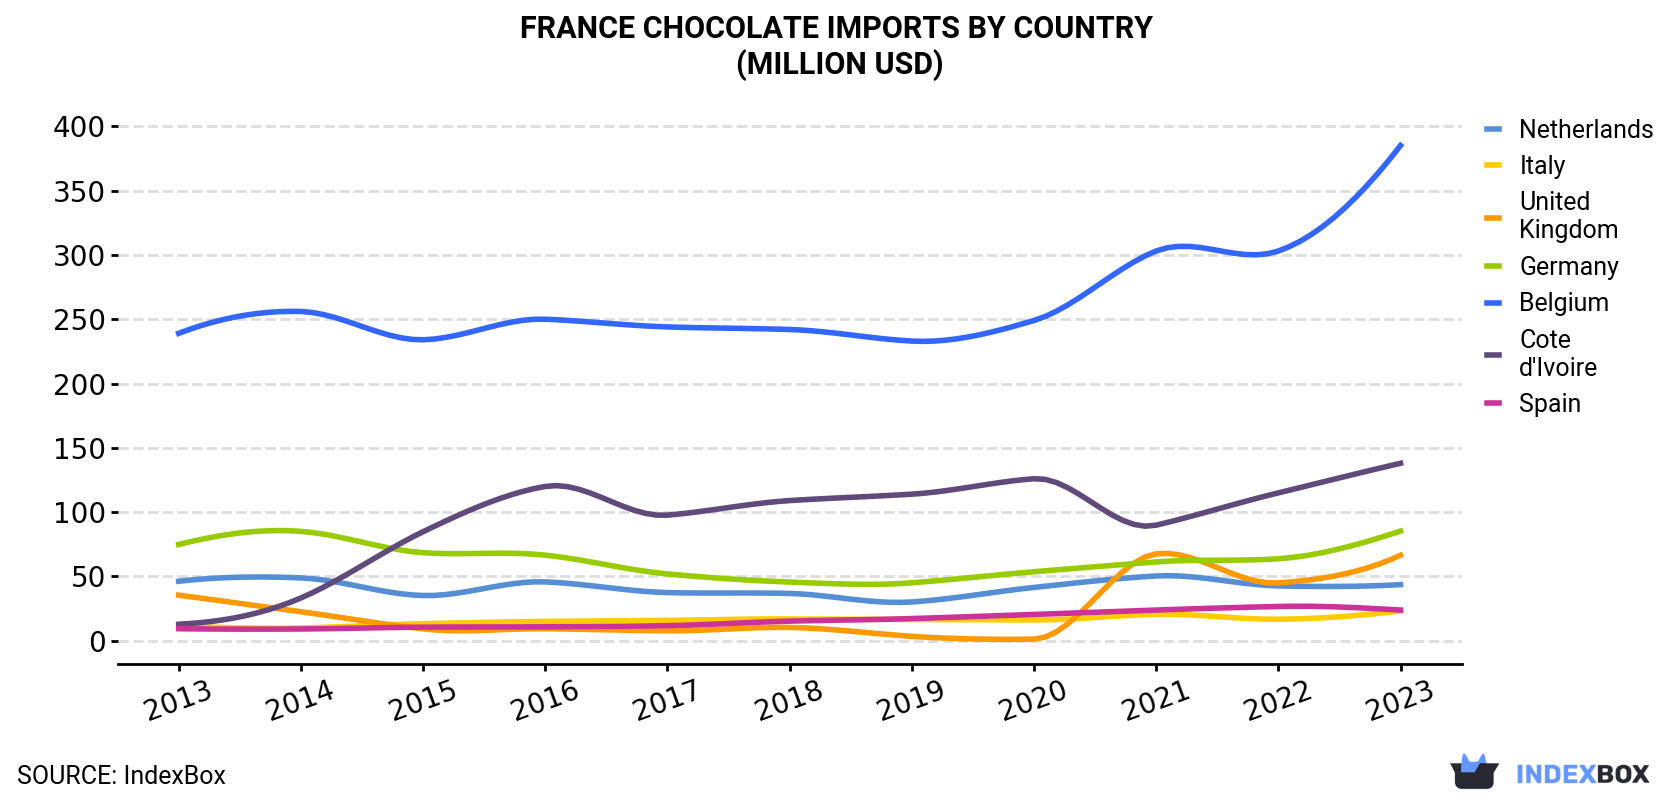 France Chocolate Imports By Country (Million USD)